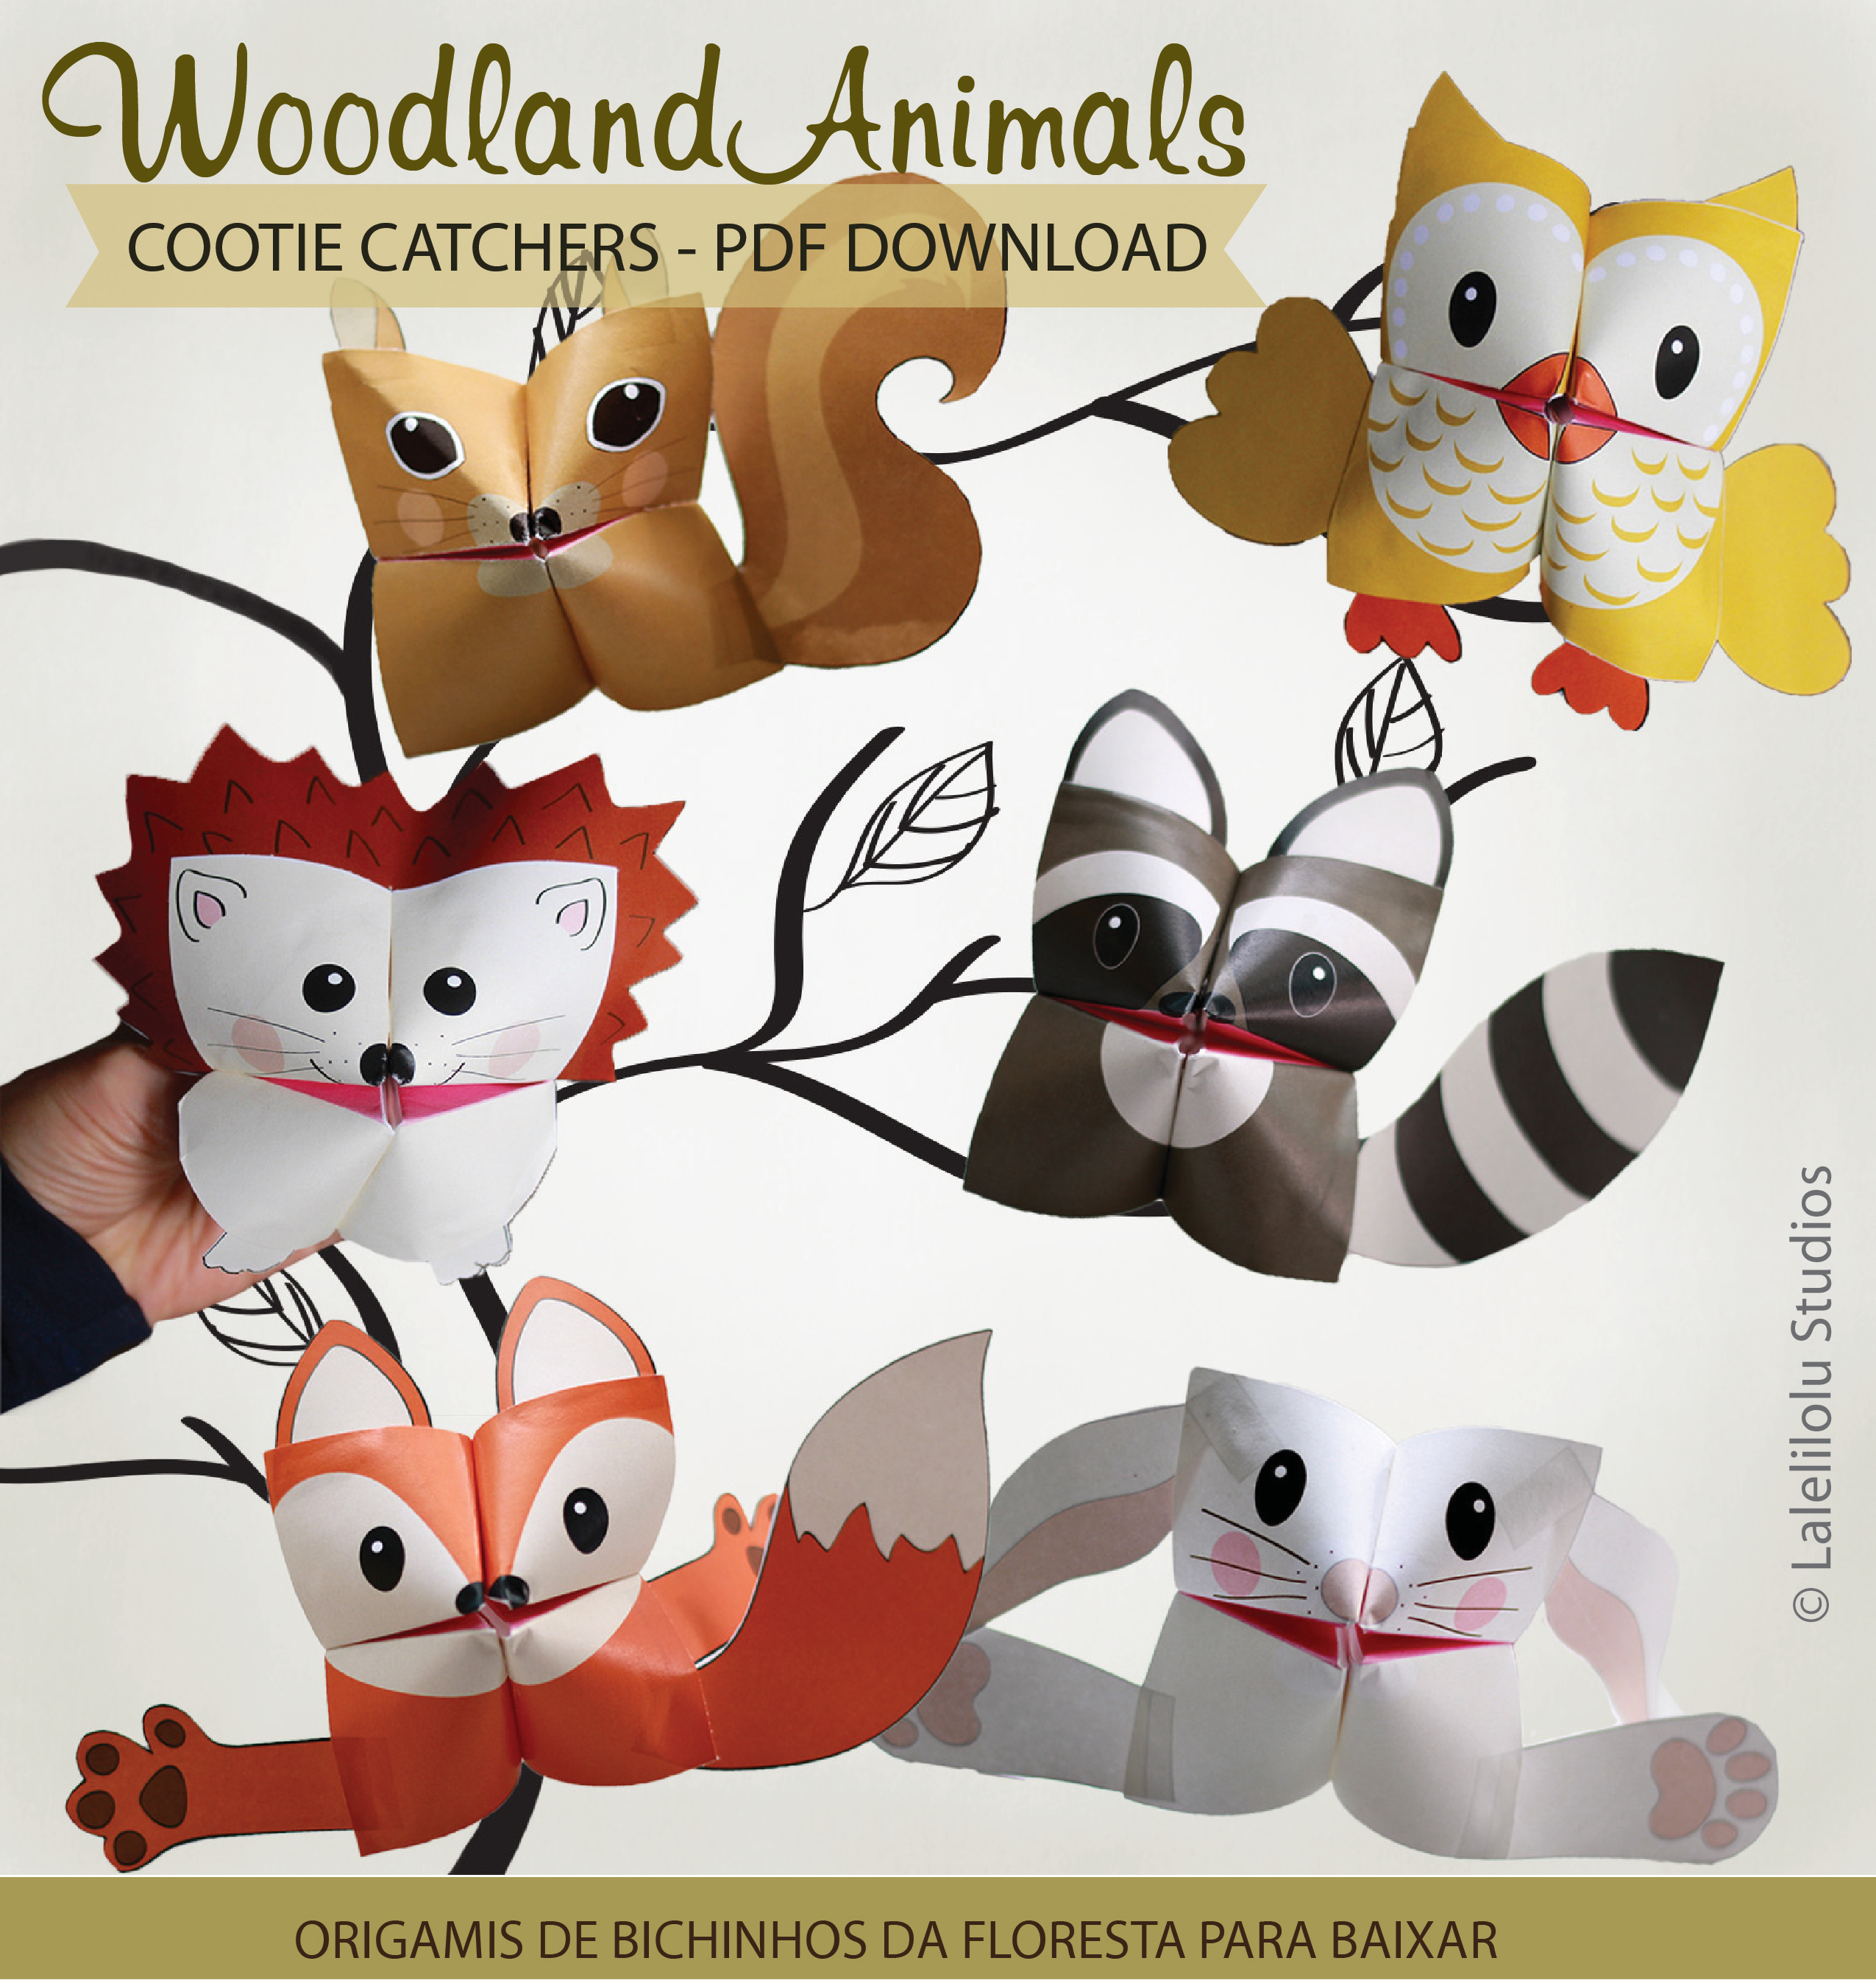 Origami Forest Animals Printable Woodland Animals Cootie Catchers Origamis For Kids